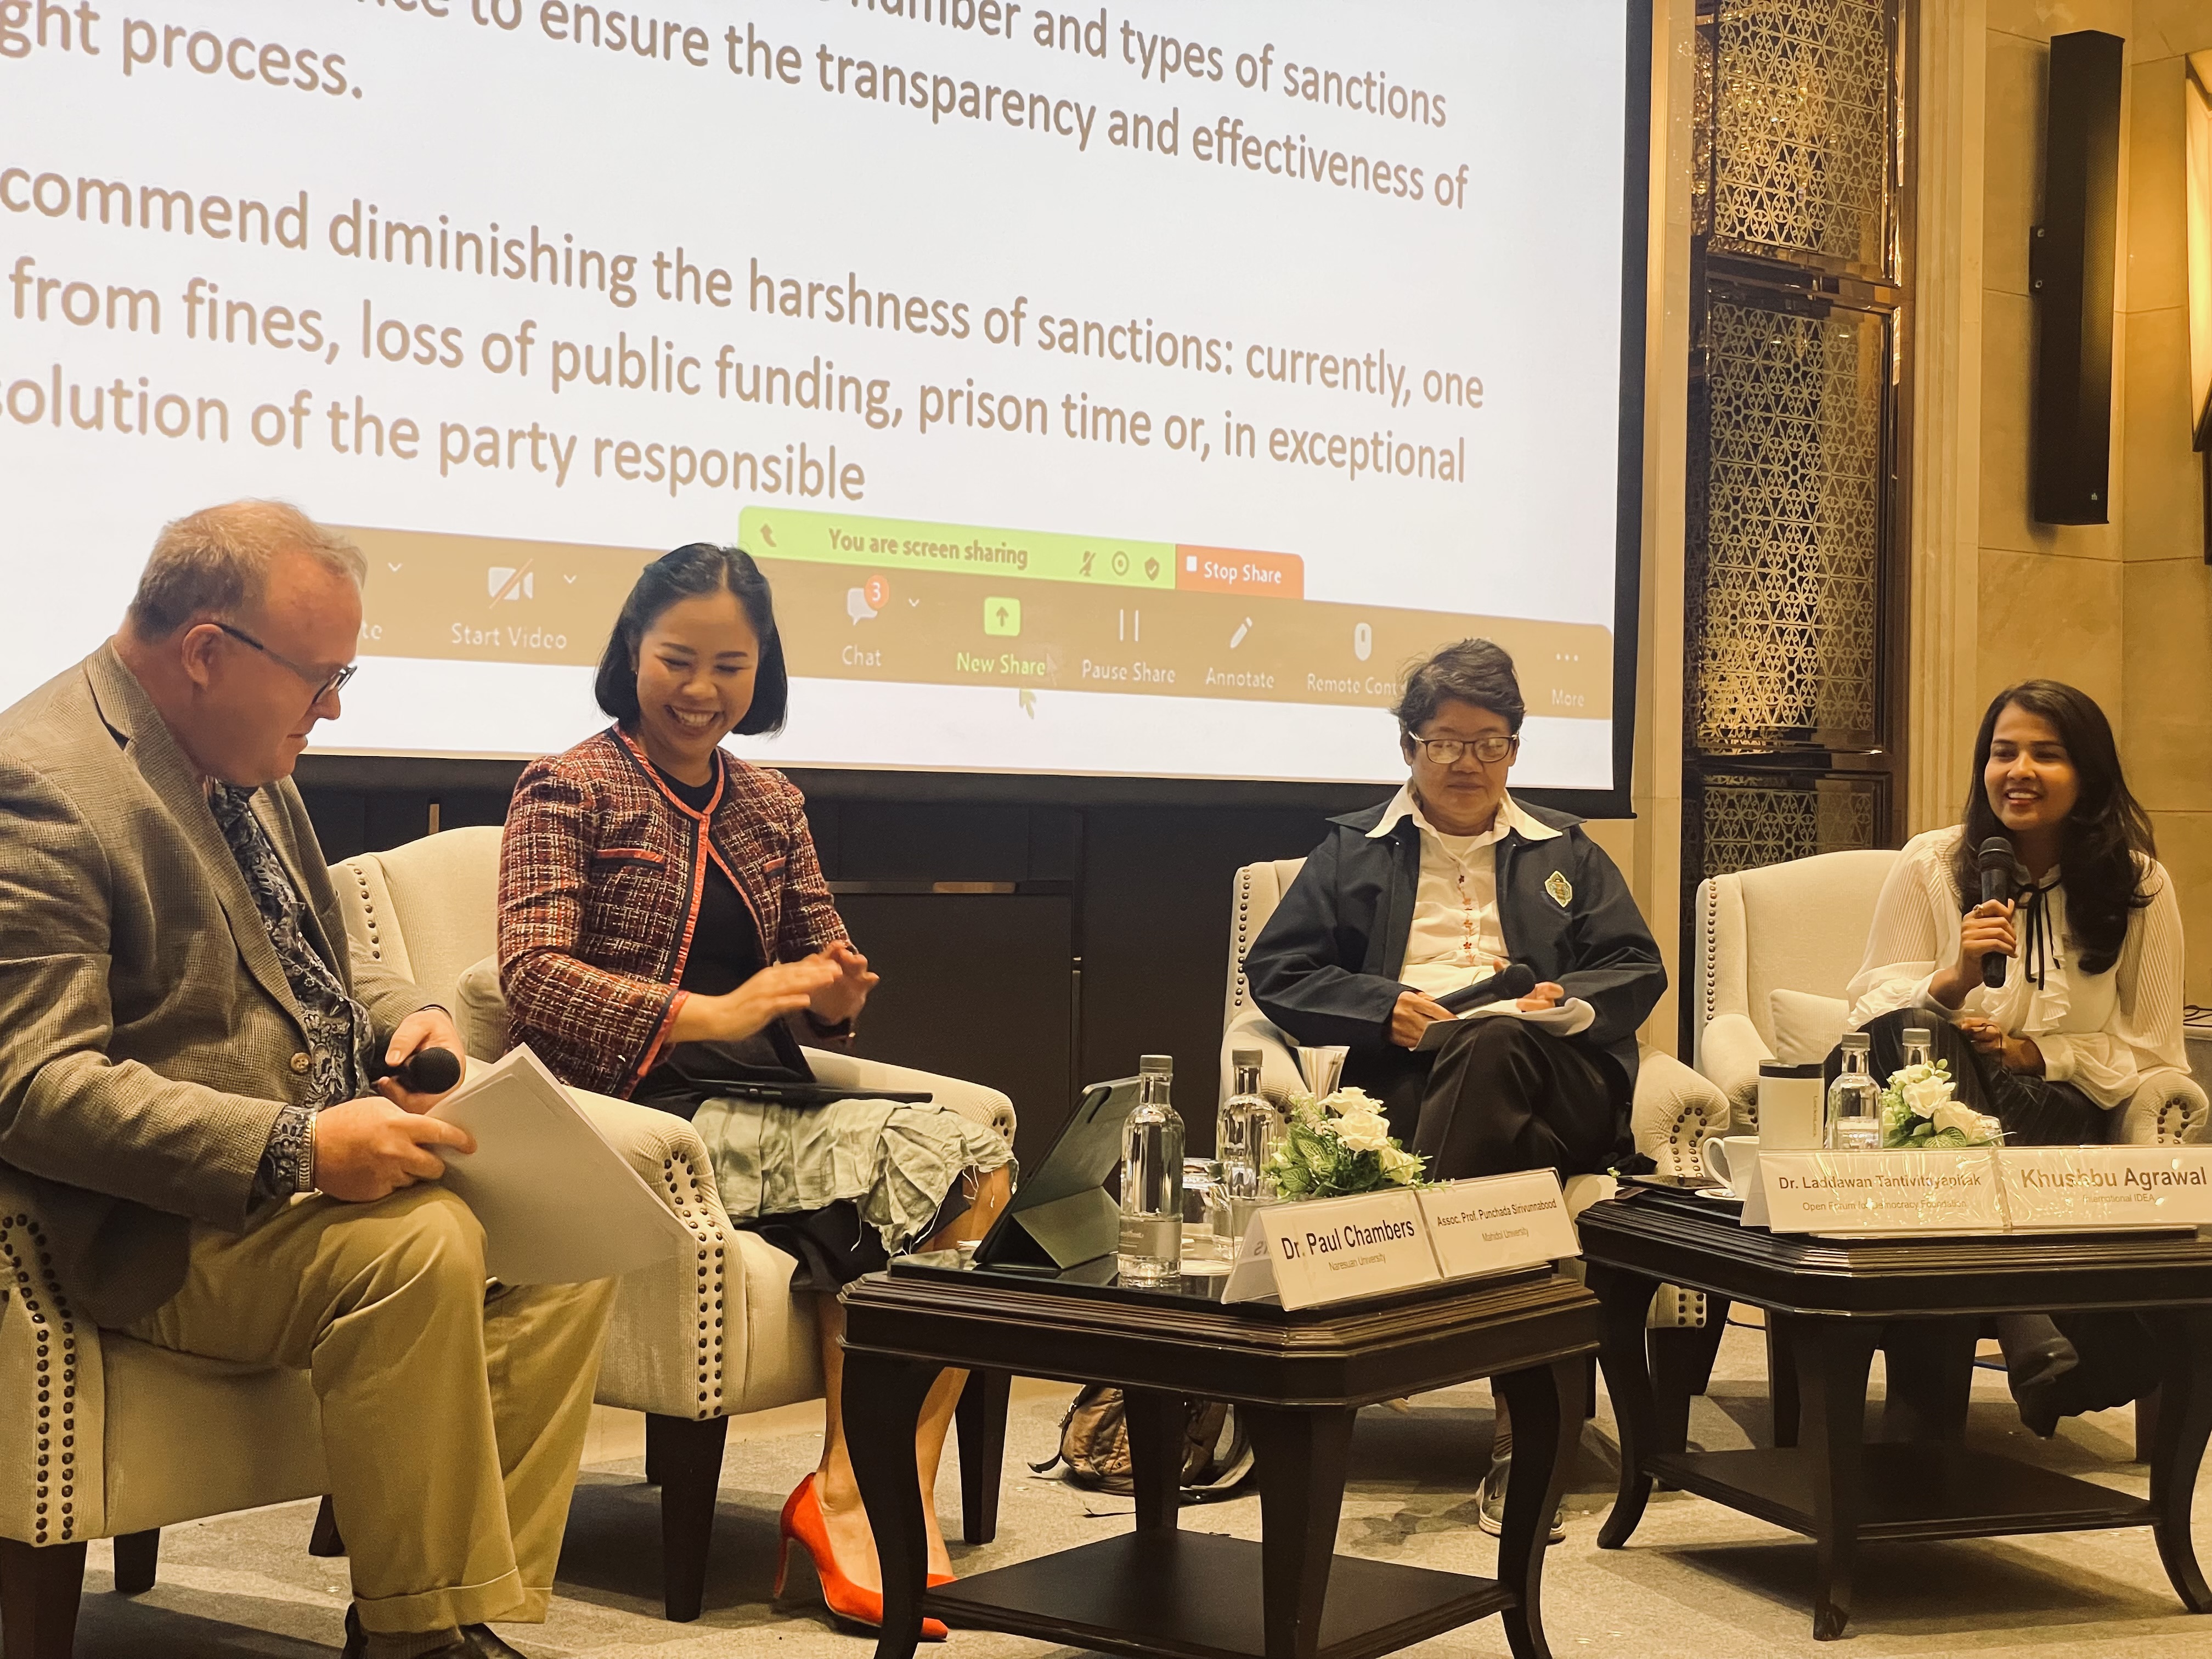 From left to right: Dr Paul Chambers, Naresuan University; Professor Punchada Sirivunnabood, lead national consultant; Dr Laddawan Tantivitayapitak, Open Forum for Democracy Foundation; and Khushbu Agrawal, International IDEA, discuss the findings from the Report Political Finance Assessment of Thailand at the Report’s launch event. Credit: International IDEA/ Leena Rikkilä Tamang